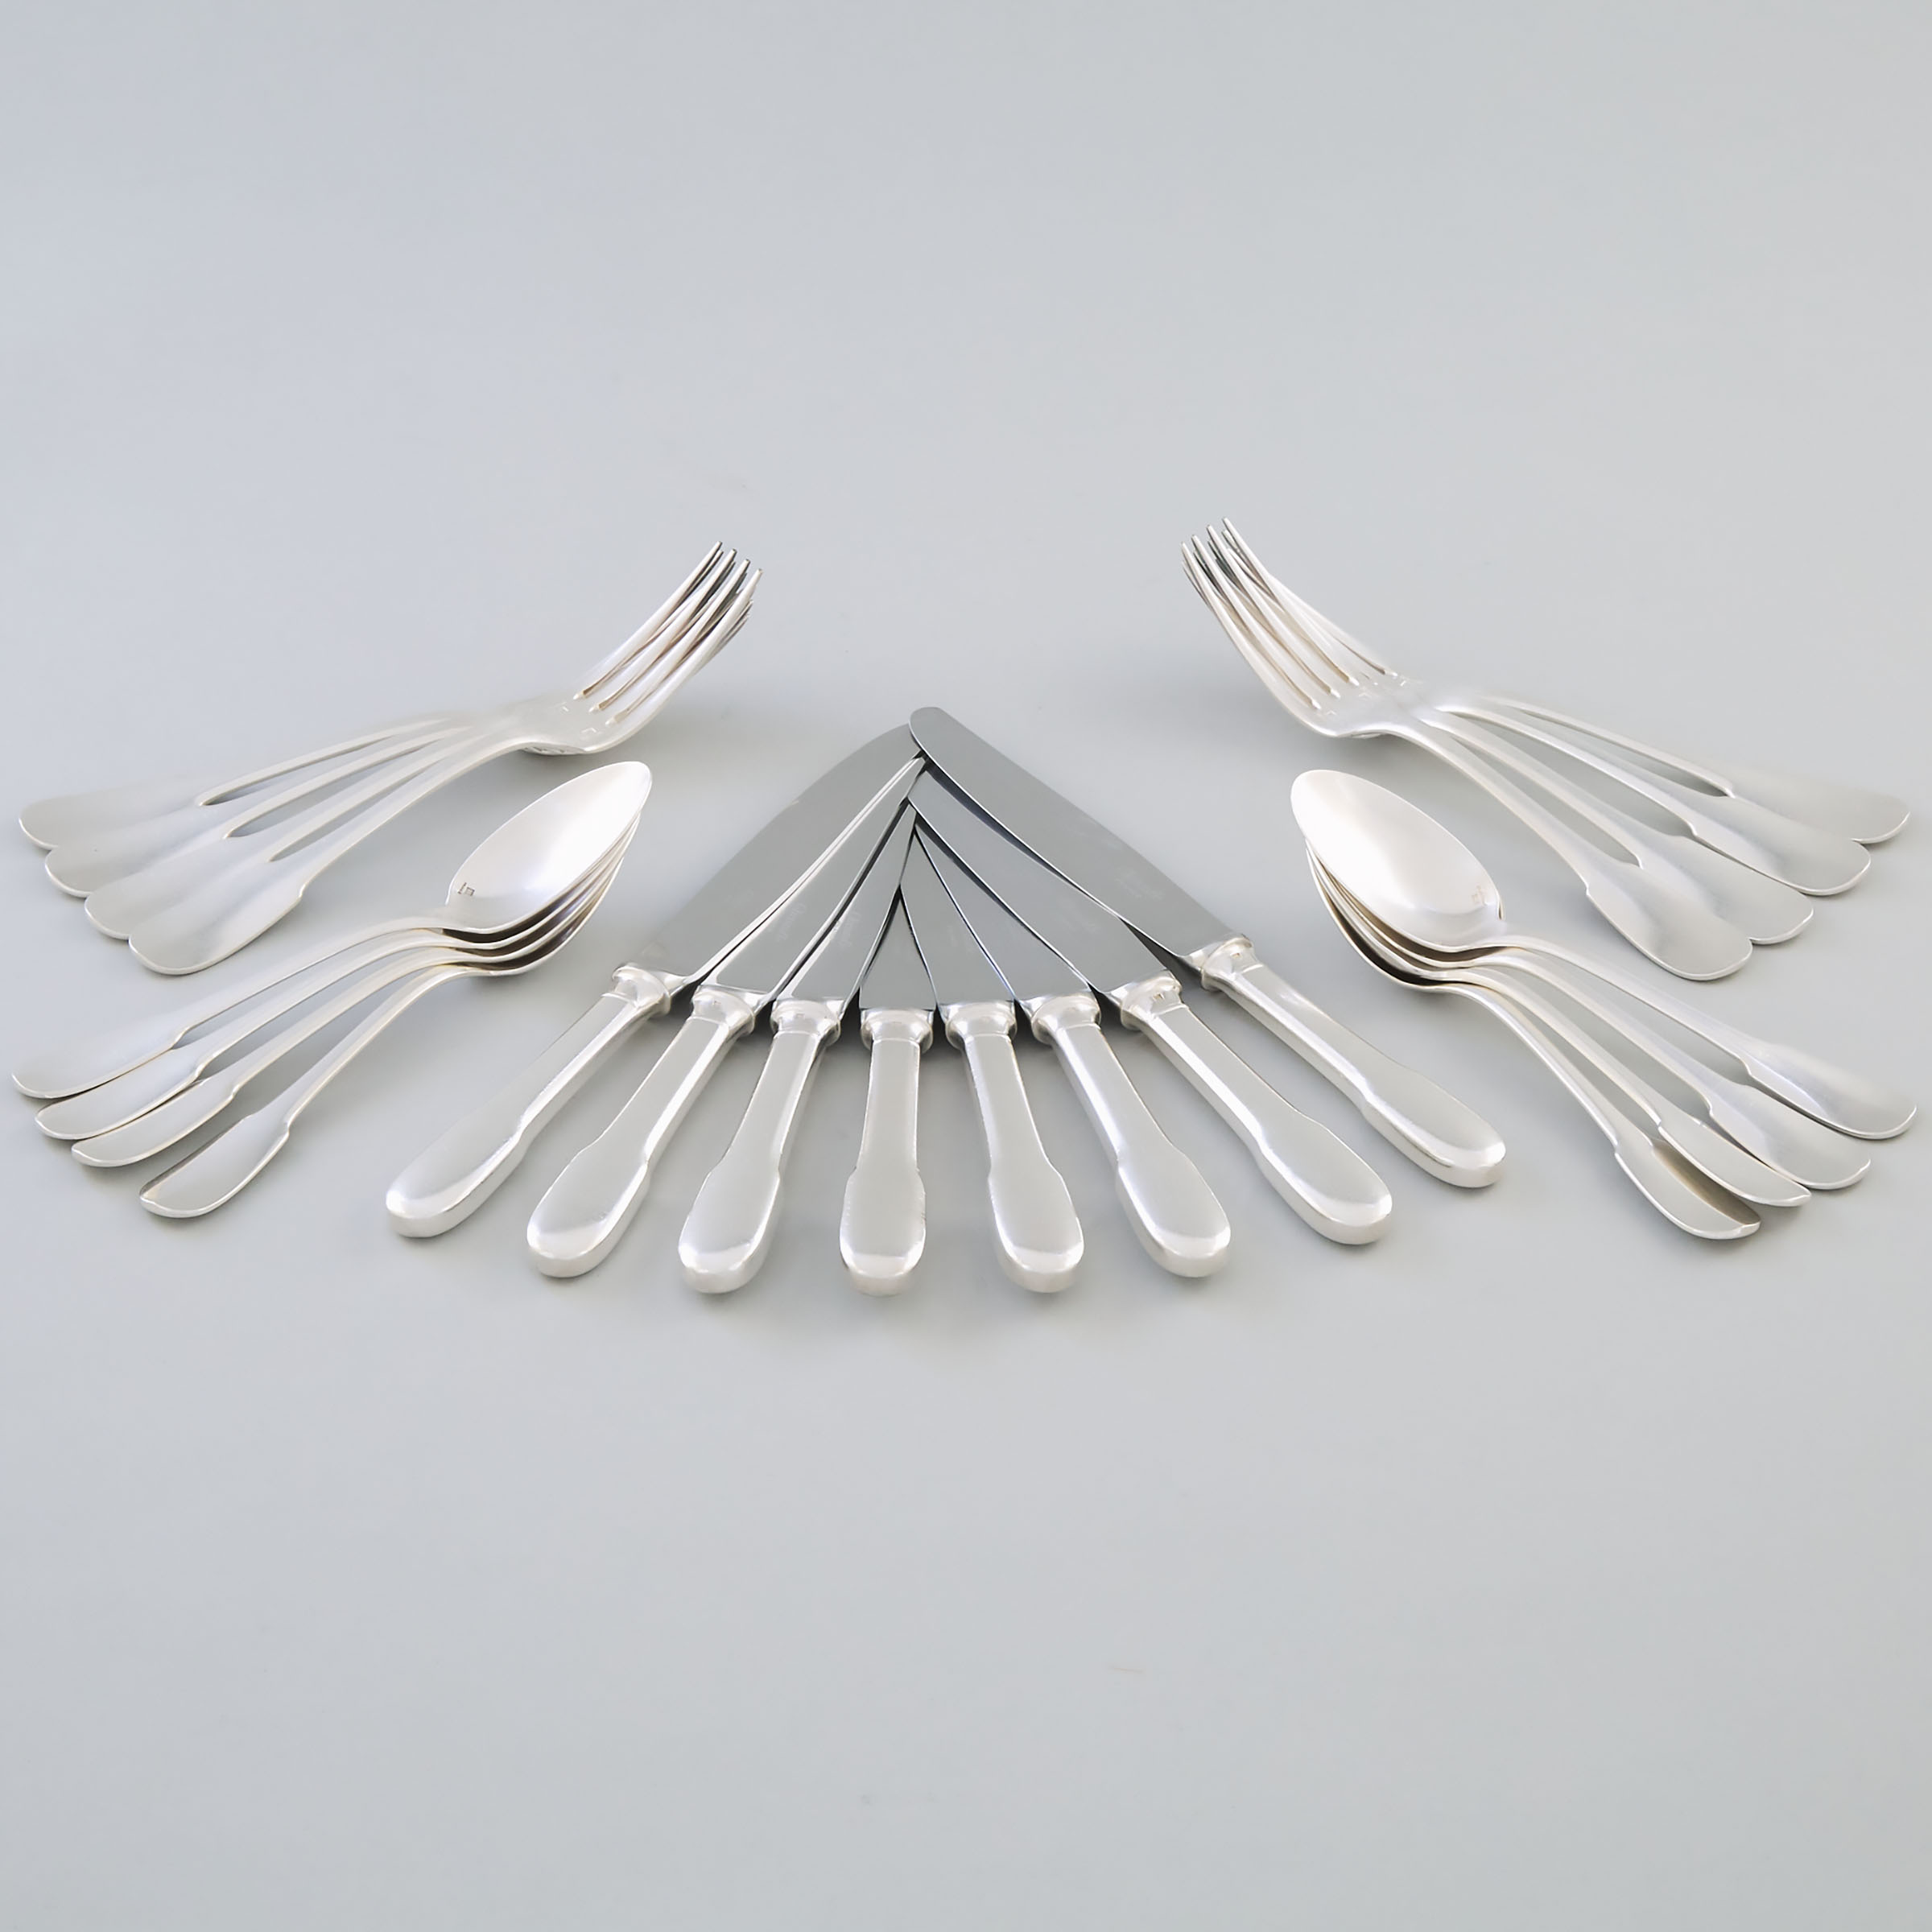 French Silver Plated ‘Cluny’ Pattern Flatware, Christofle, 20th century